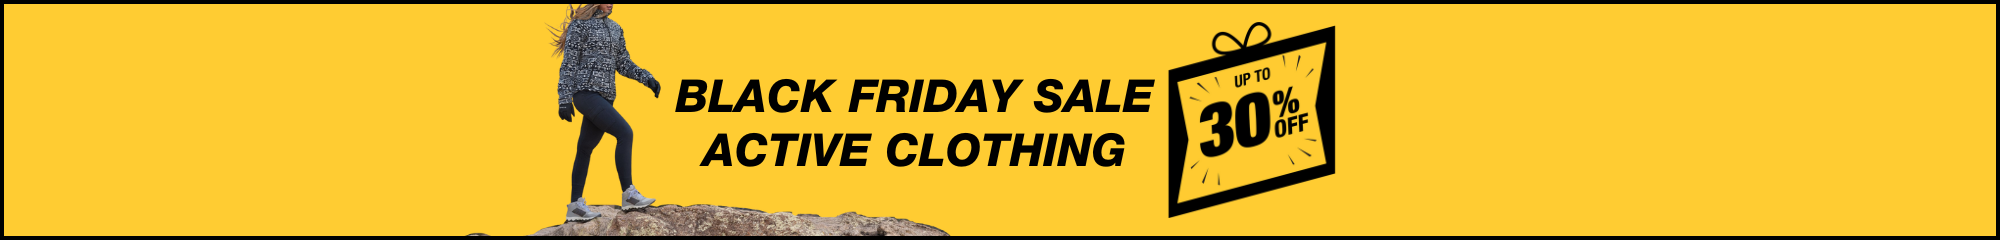 Black Friday Deals on Men's Active Clothing